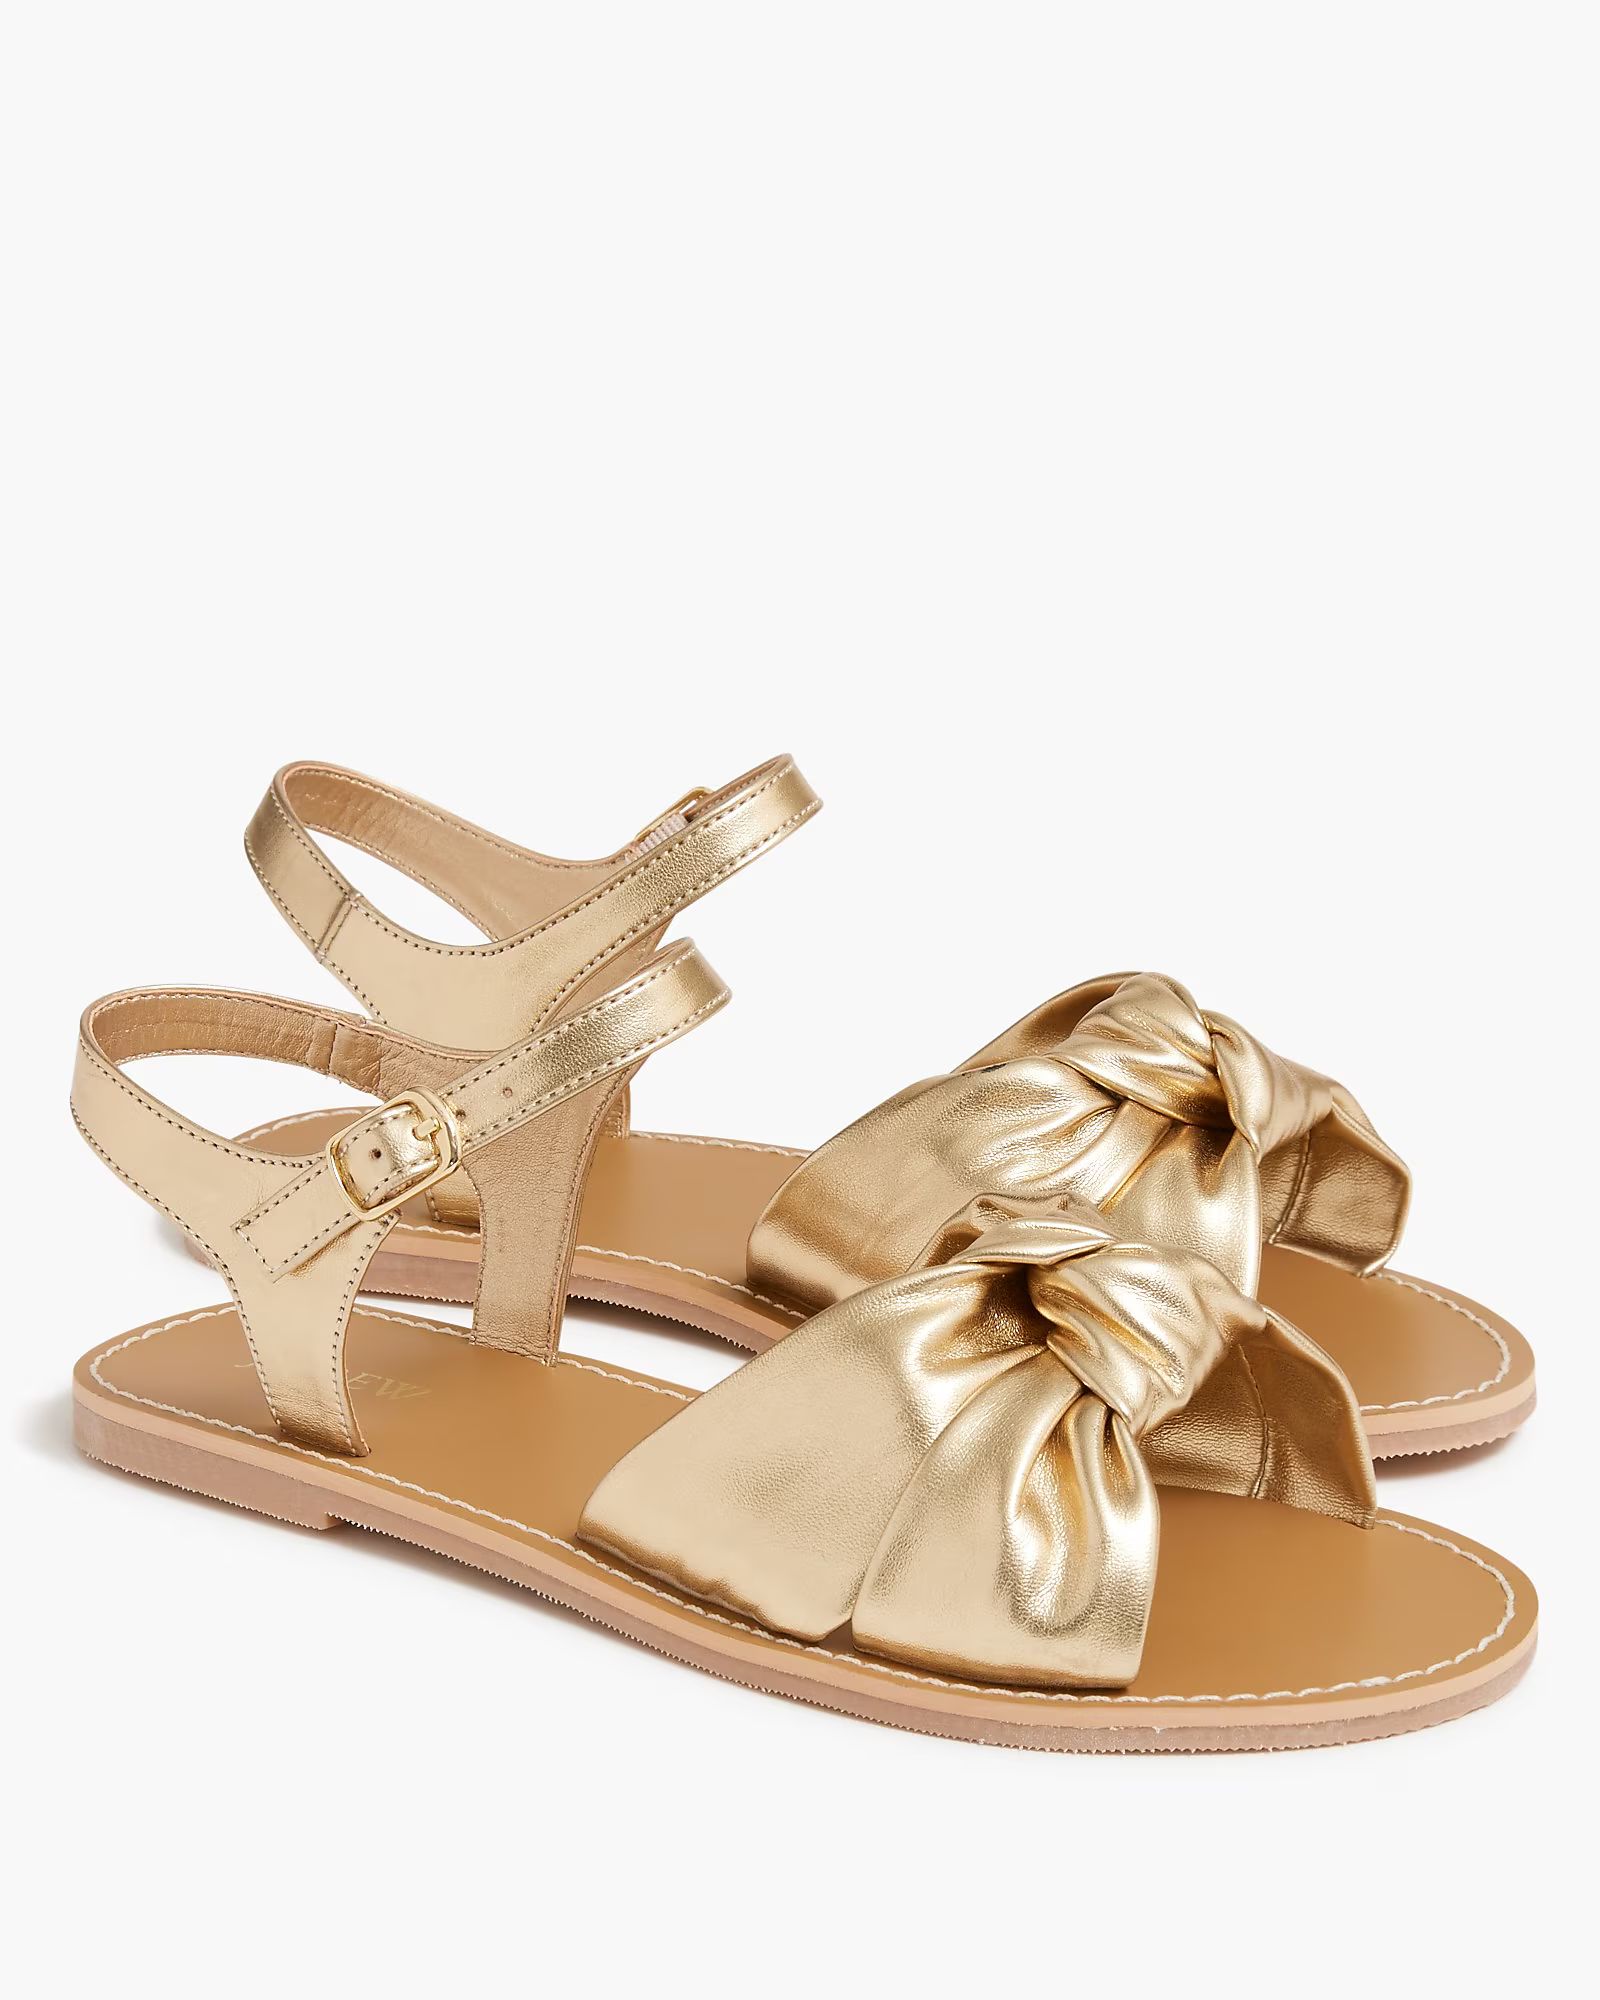 Girls' knot sandals with ankle strap | J.Crew Factory